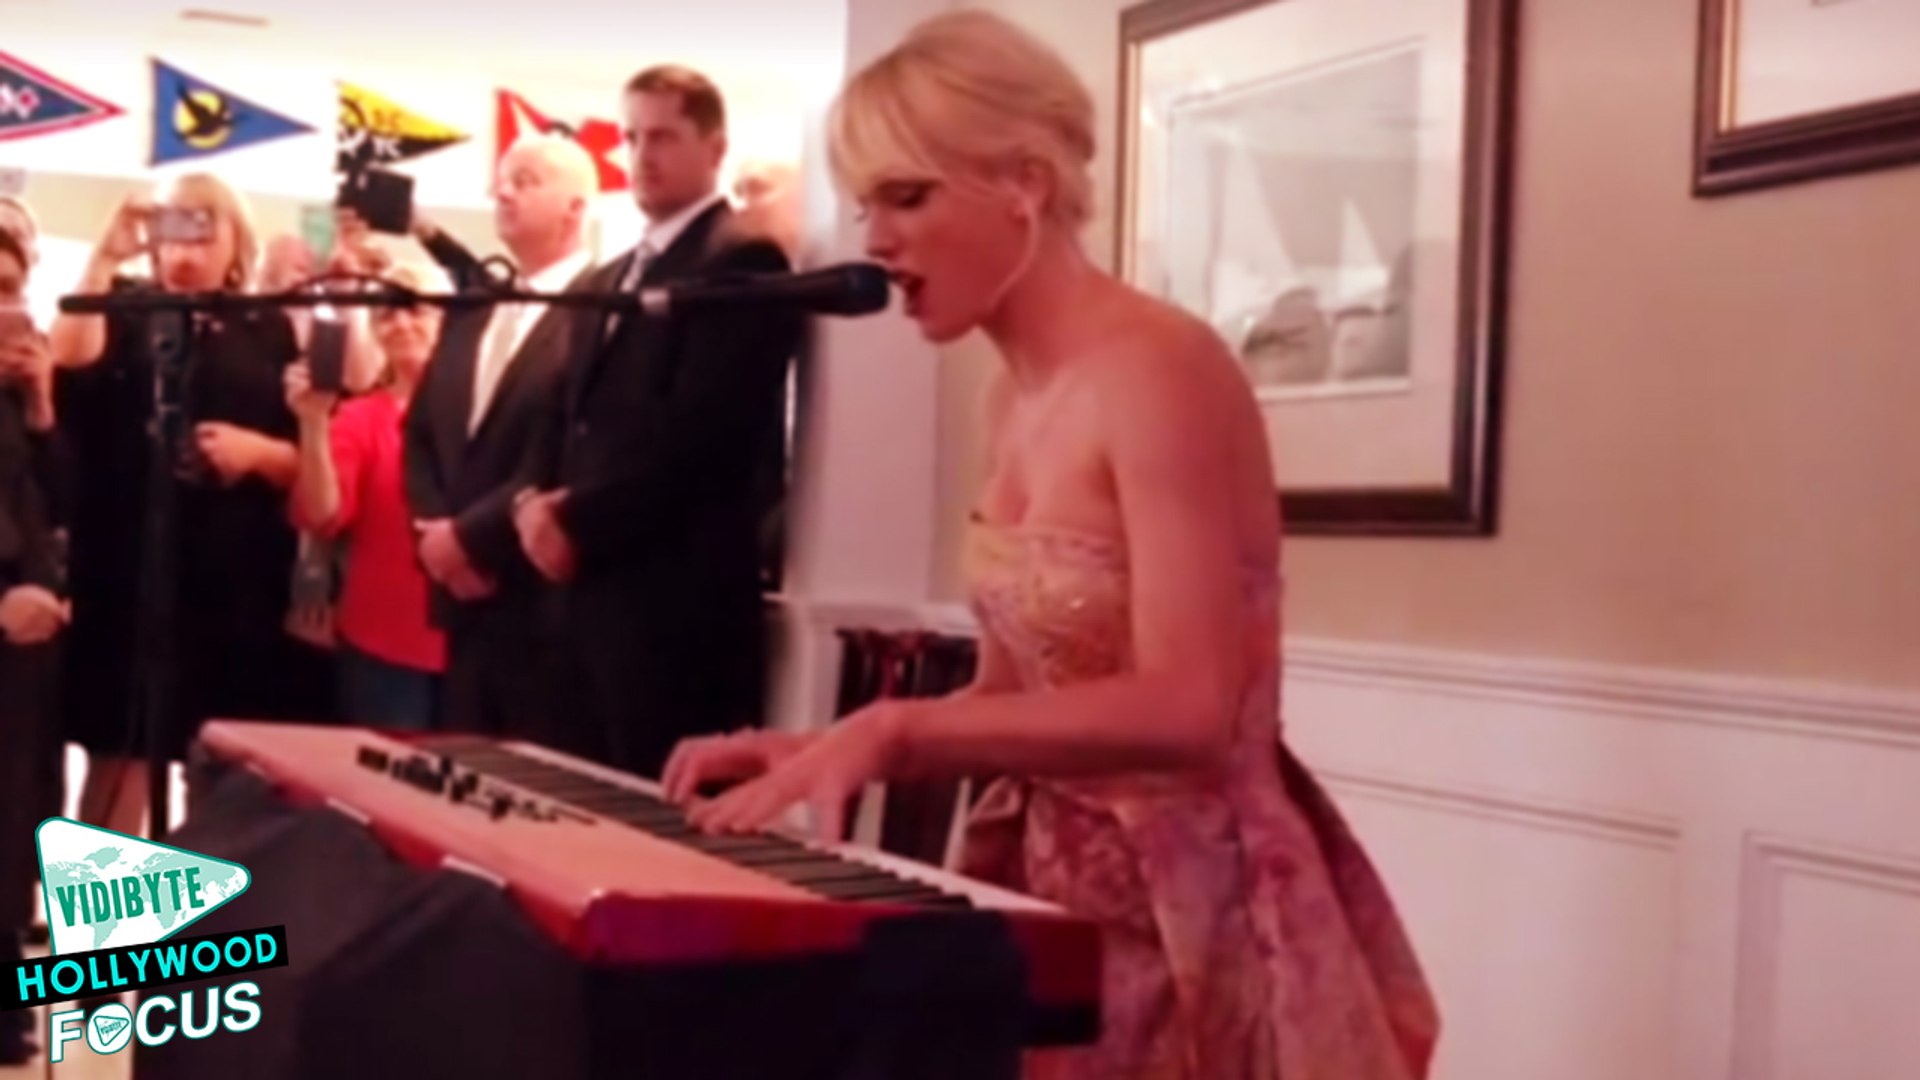 Taylor Swift Surprises Fan with ‘Blank Space’ Performance at His Wedding